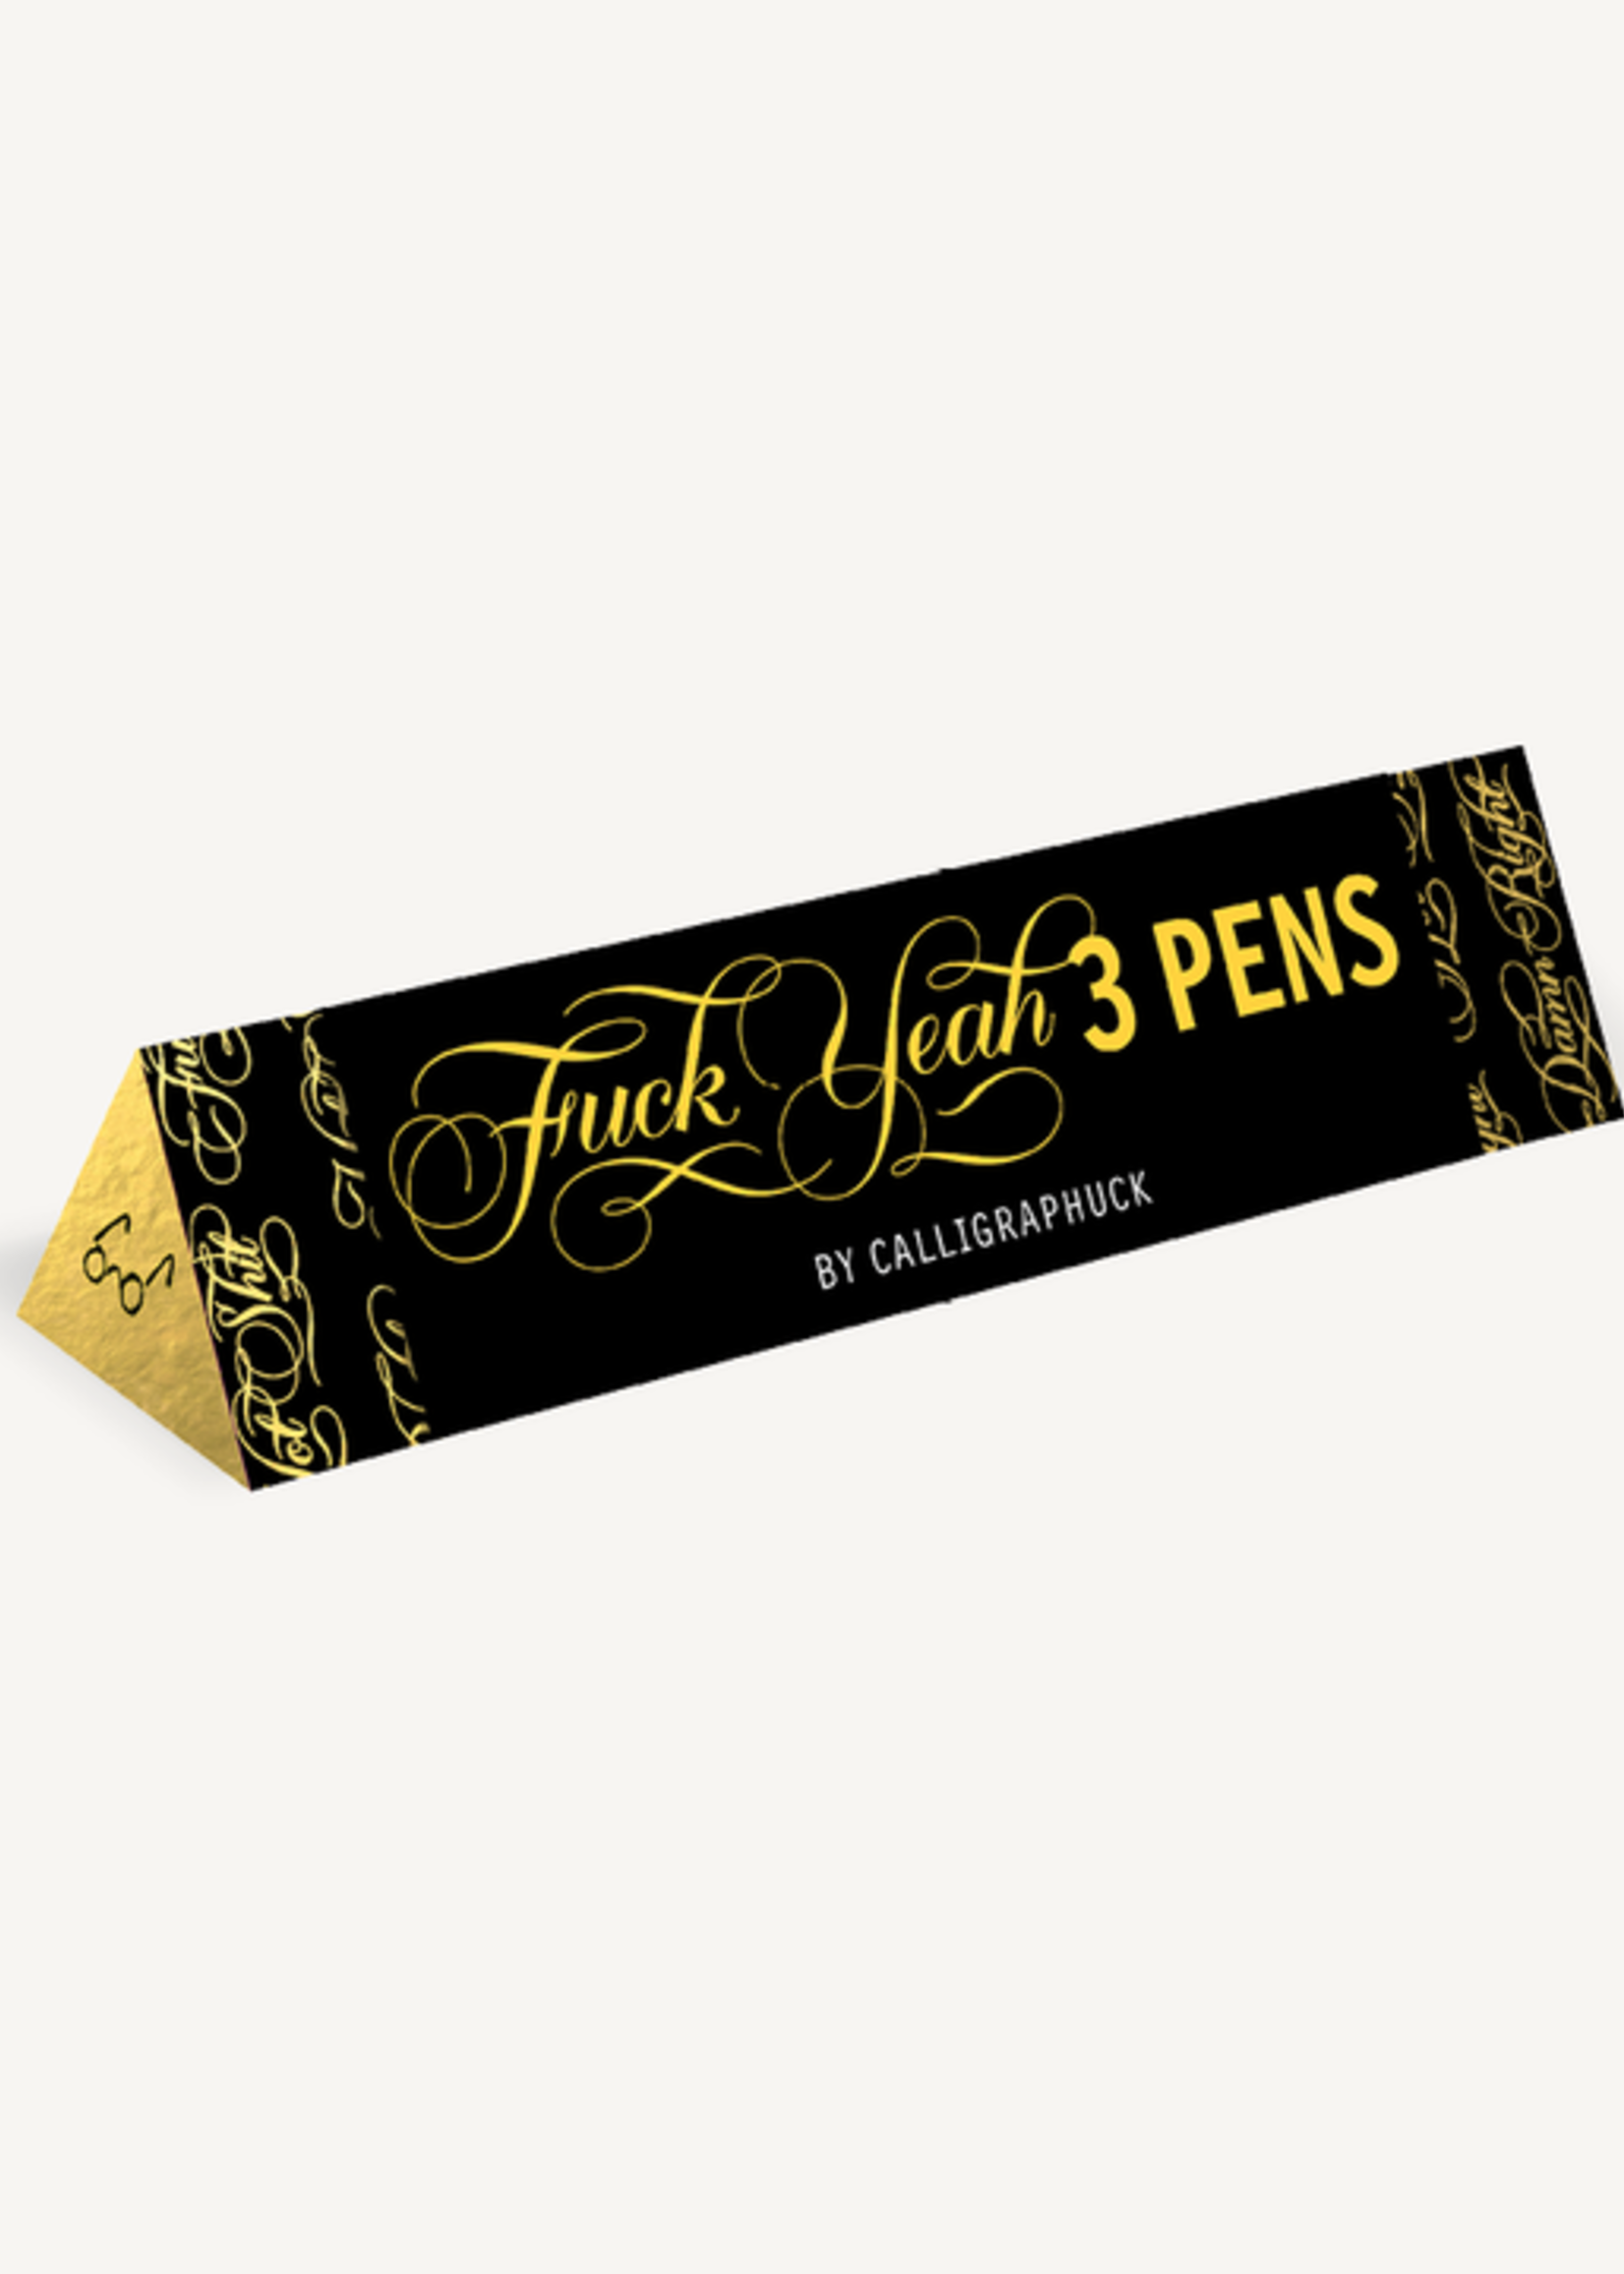 Fuck Yeah: Three Pens by Calligraphuck